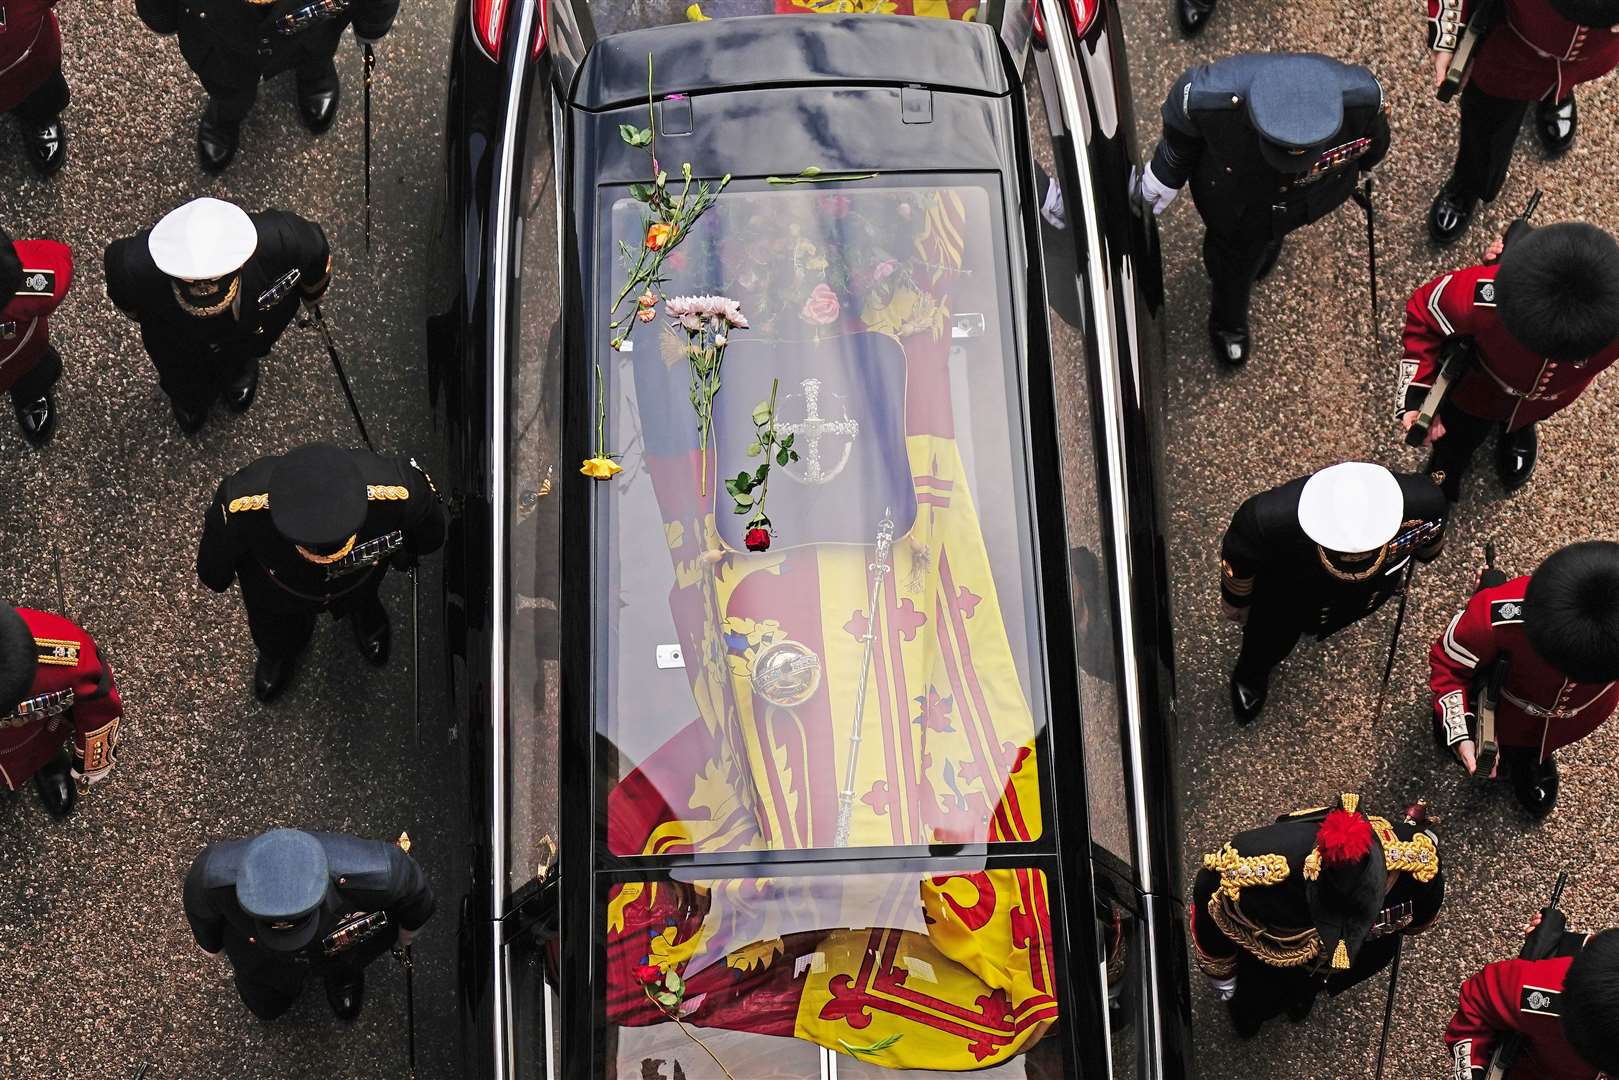 Flowers on the hearse carrying the coffin of the Queen (Aaron Chown/PA)